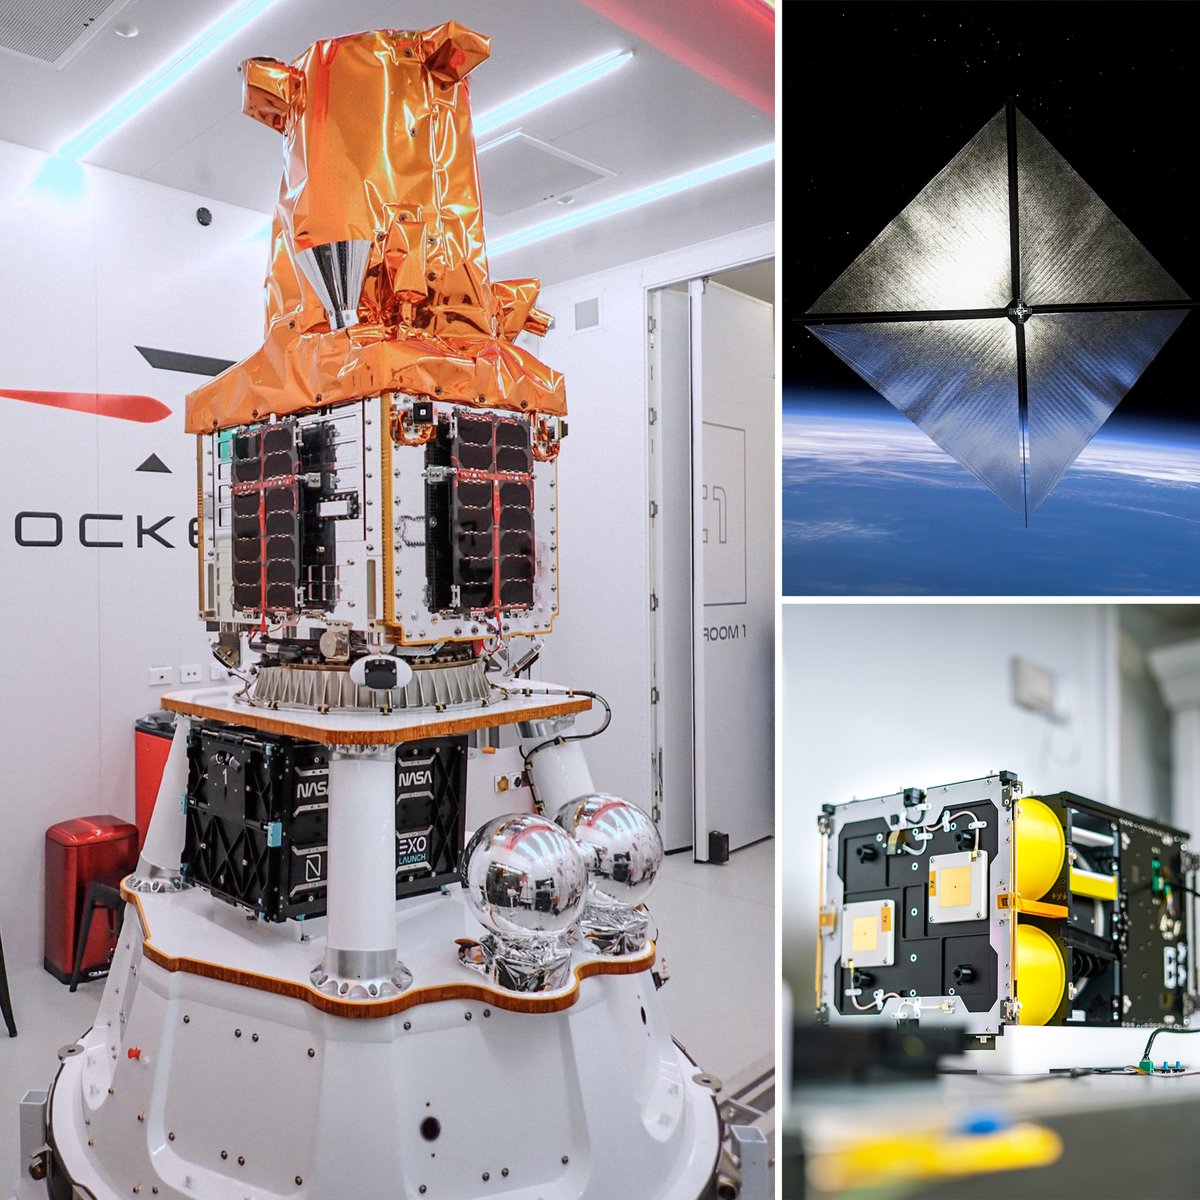 It's launch day! @NASA's ACS3 solar sail demonstrator, carried on our 12U CubeSat bus, is scheduled to launch with Rocket Lab from New Zealand at 22:00 UTC.

The road getting here was full of interesting challenges that our engineering team had to work through together with NASA: